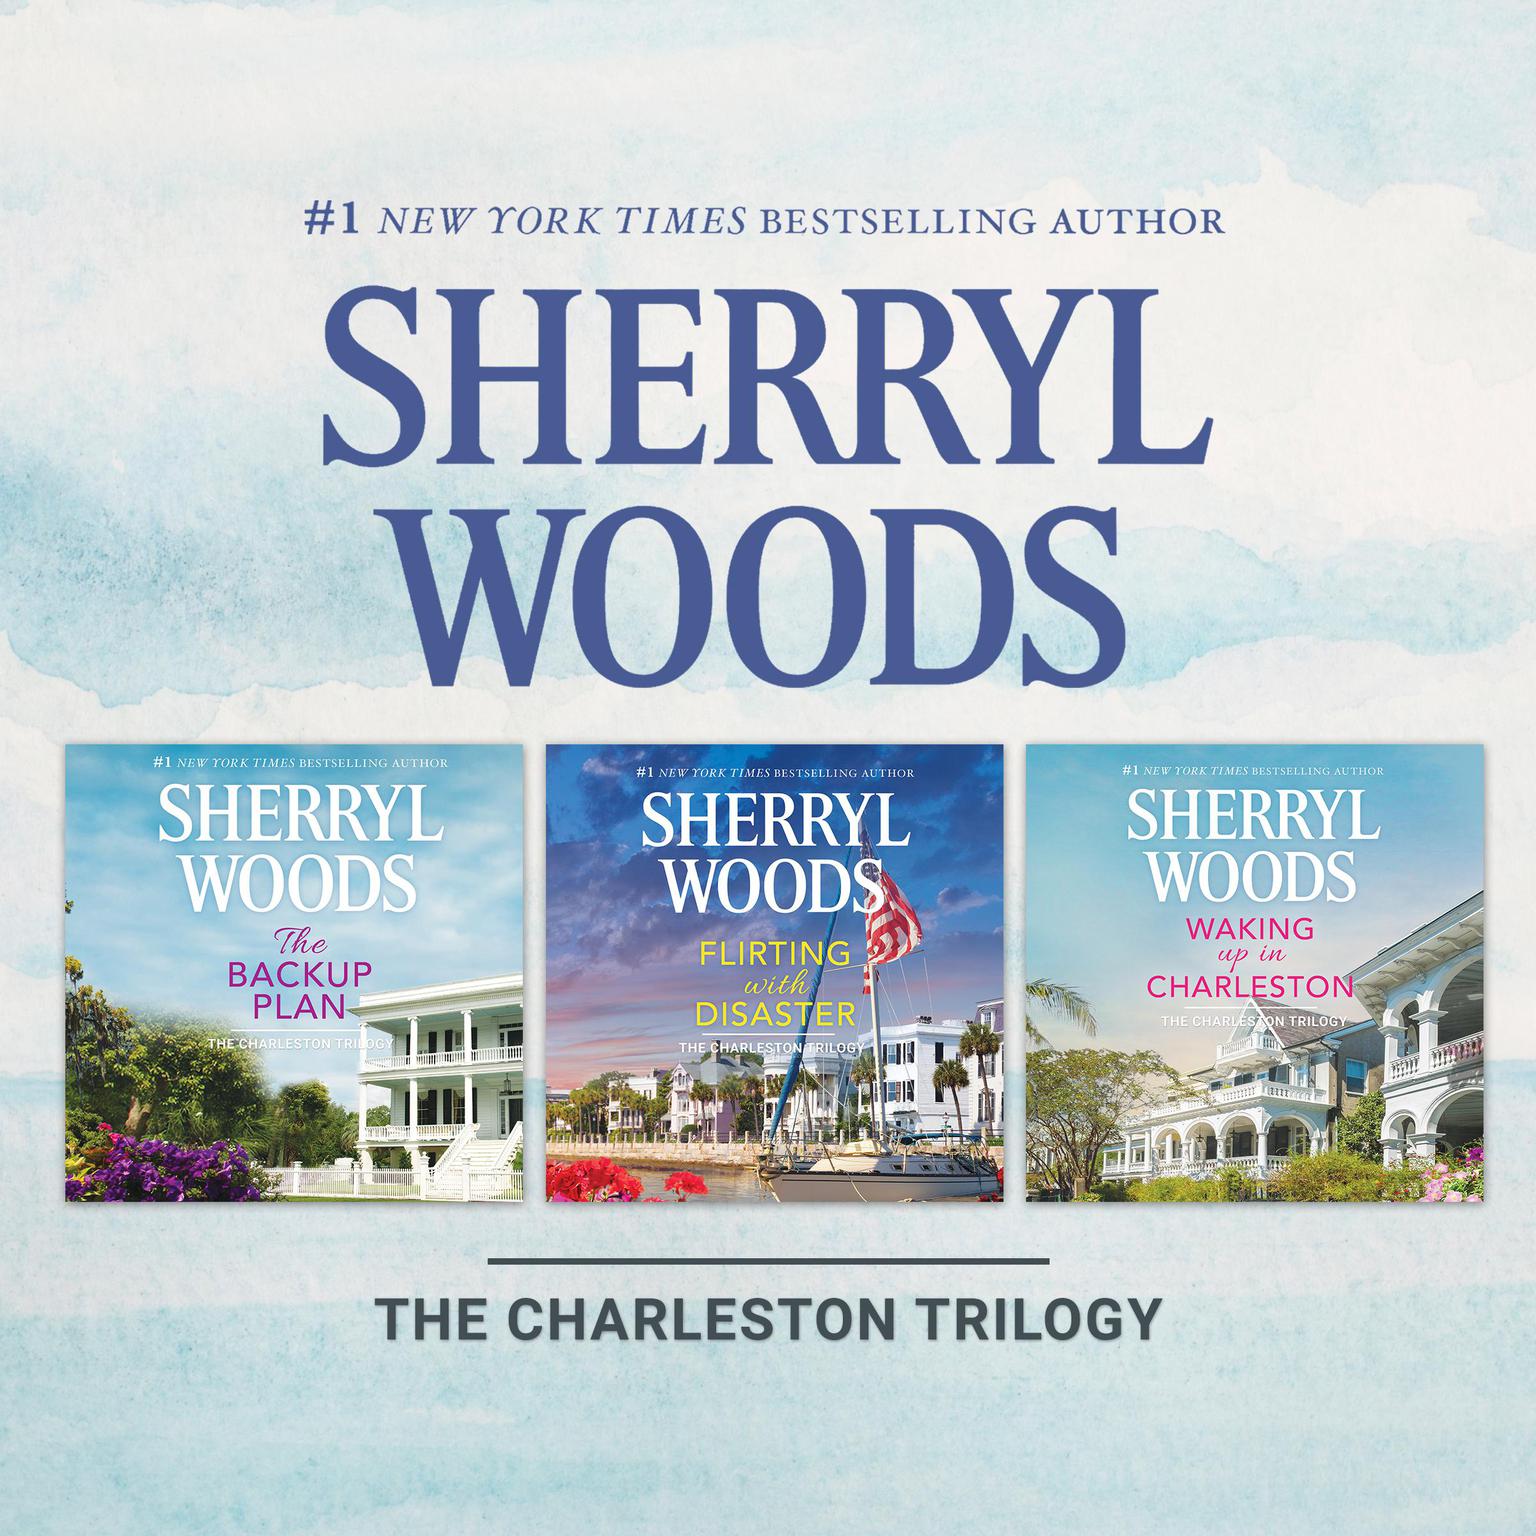 The Charleston Trilogy: The complete series Audiobook, by Sherryl Woods